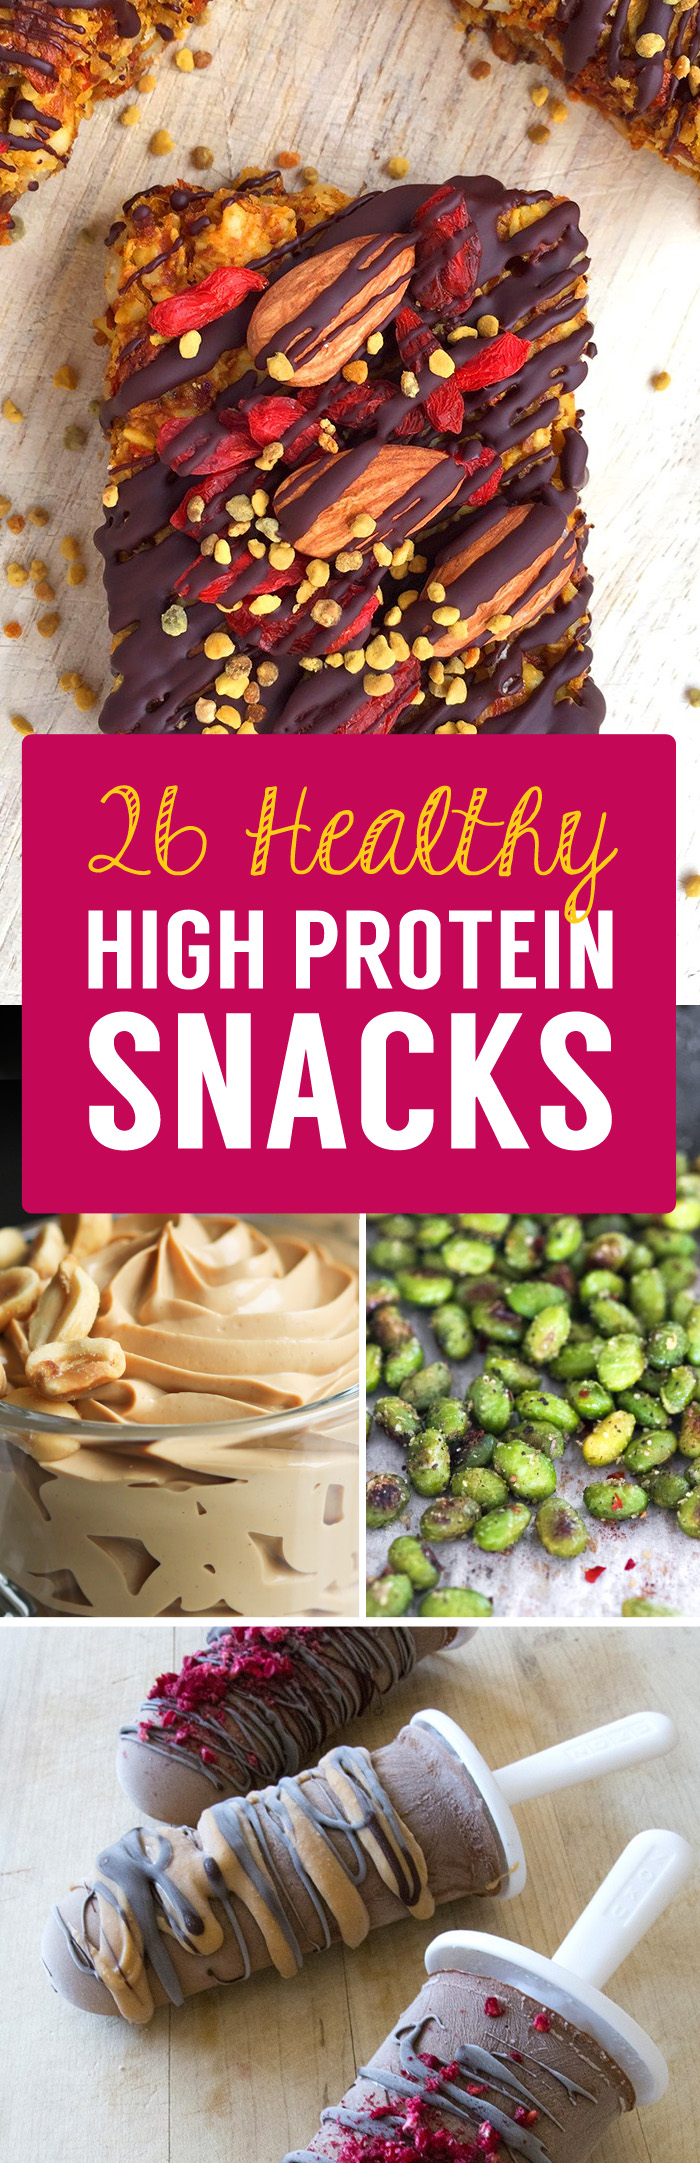 26 High Protein Snacks That Will Help You Lose Fat & Feel Great! -  TrimmedandToned